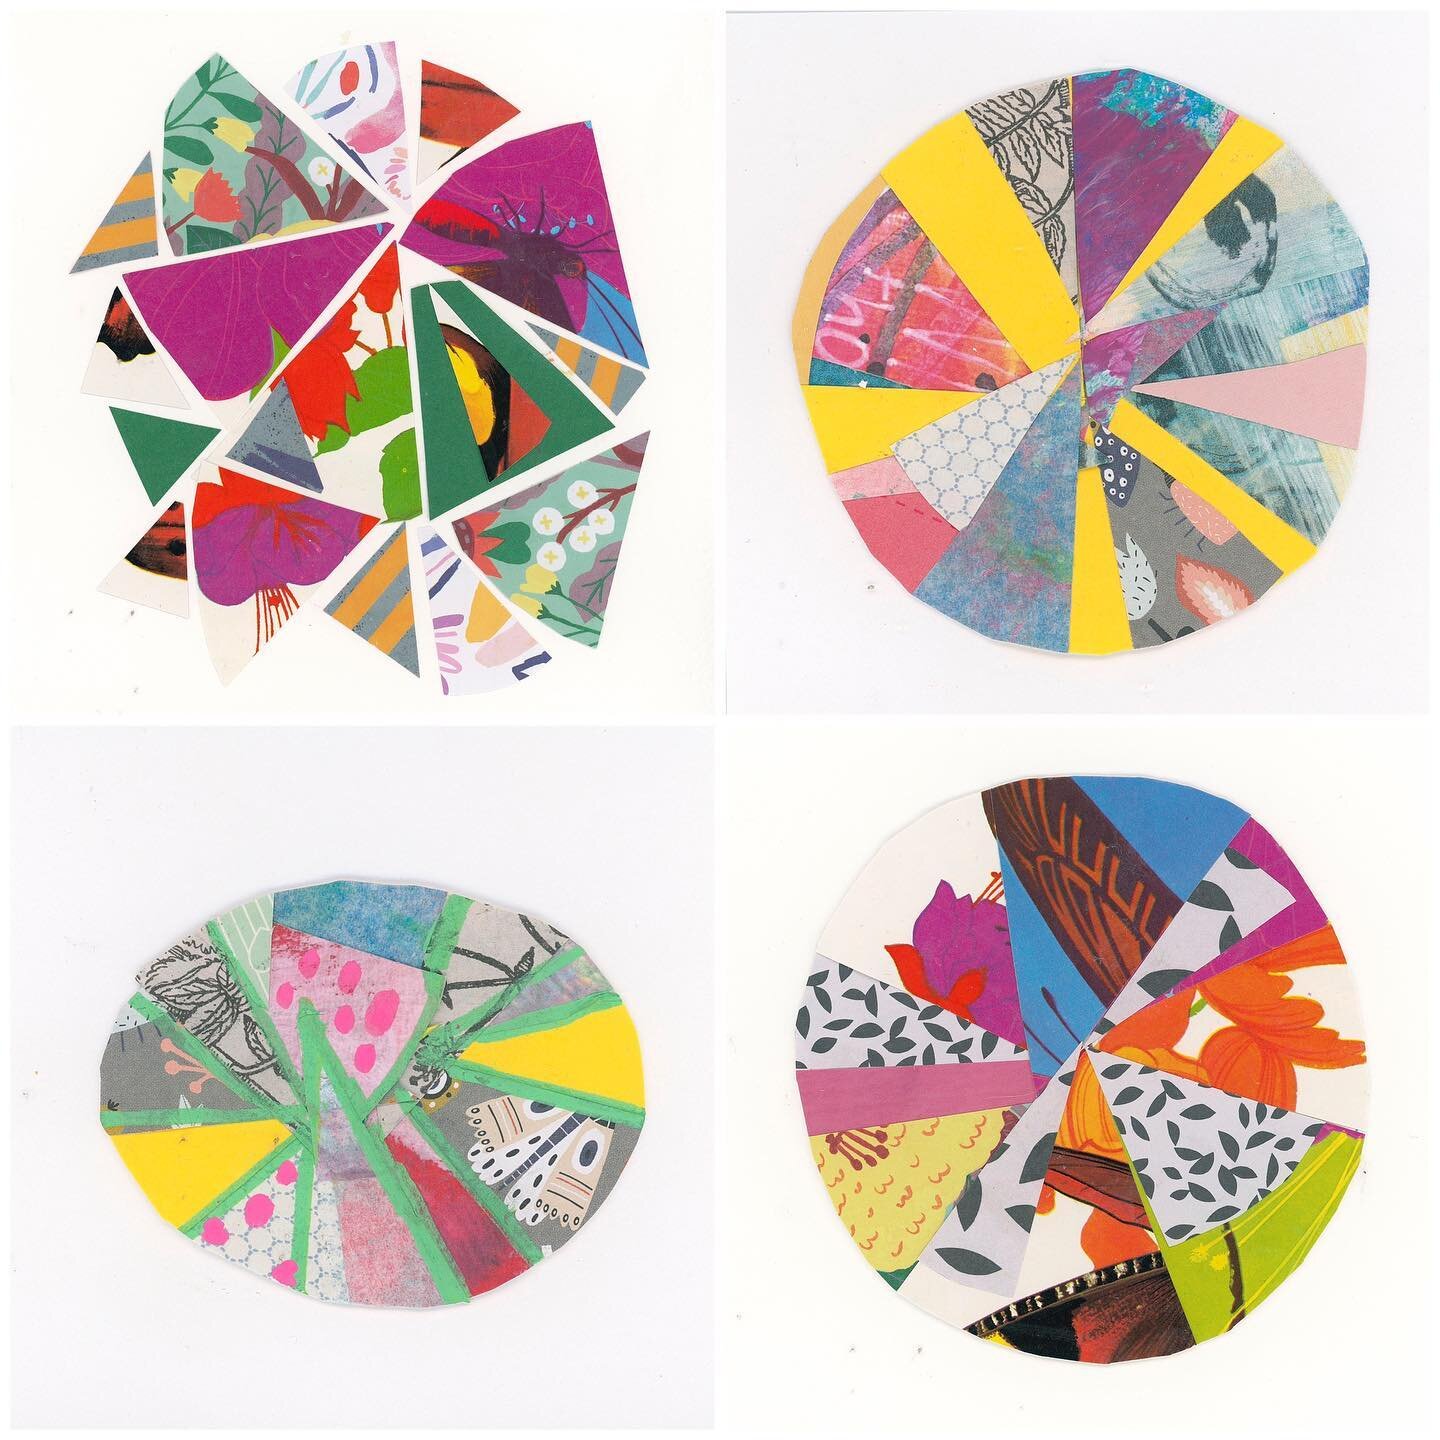 More color wheels! 🎨 ✂️

&ldquo;&ldquo;I found I could say things with color and shapes that I couldn&rsquo;t say any other way &ndash; things I had no words for.&rdquo;
&ndash; Georgia O&rsquo;Keefe
.
.
.
.
.
.
.
image of: four circular collages ma